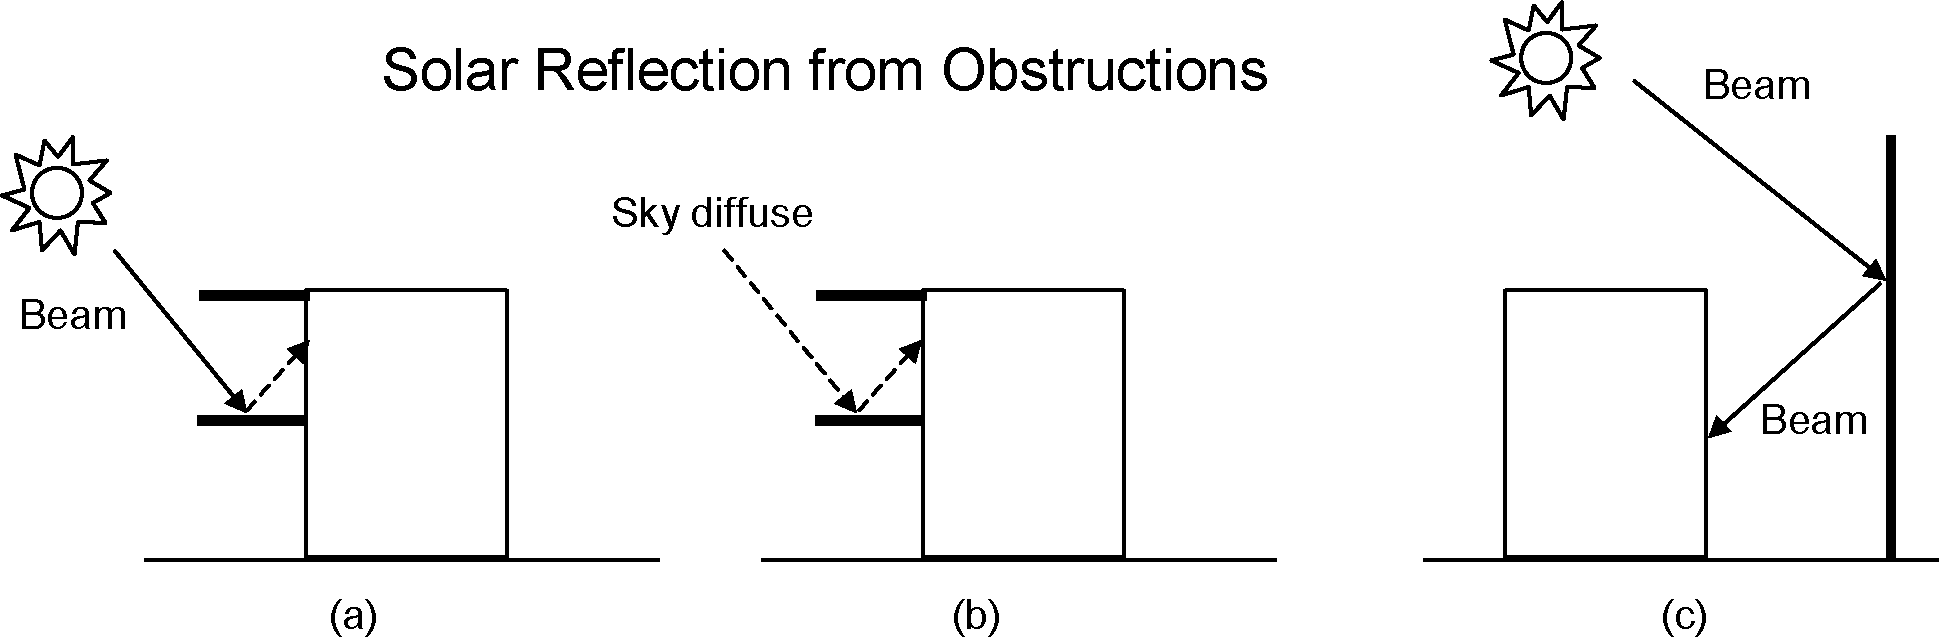 Examples of solar reflection from shadowing surfaces in the Shading series of input objects. Solid arrows are beam solar radiation; dashed arrows are diffuse solar radiation. (a) Diffuse reflection of beam solar radiation from the top of an overhang. (b) Diffuse reflection of sky solar radiation from the top of an overhang. (c) Beam-to-beam (specular) reflection from the facade of an adjacent highly-glazed building represented by a vertical shadowing surface. [fig:examples-of-solar-reflection-from-shadowing]